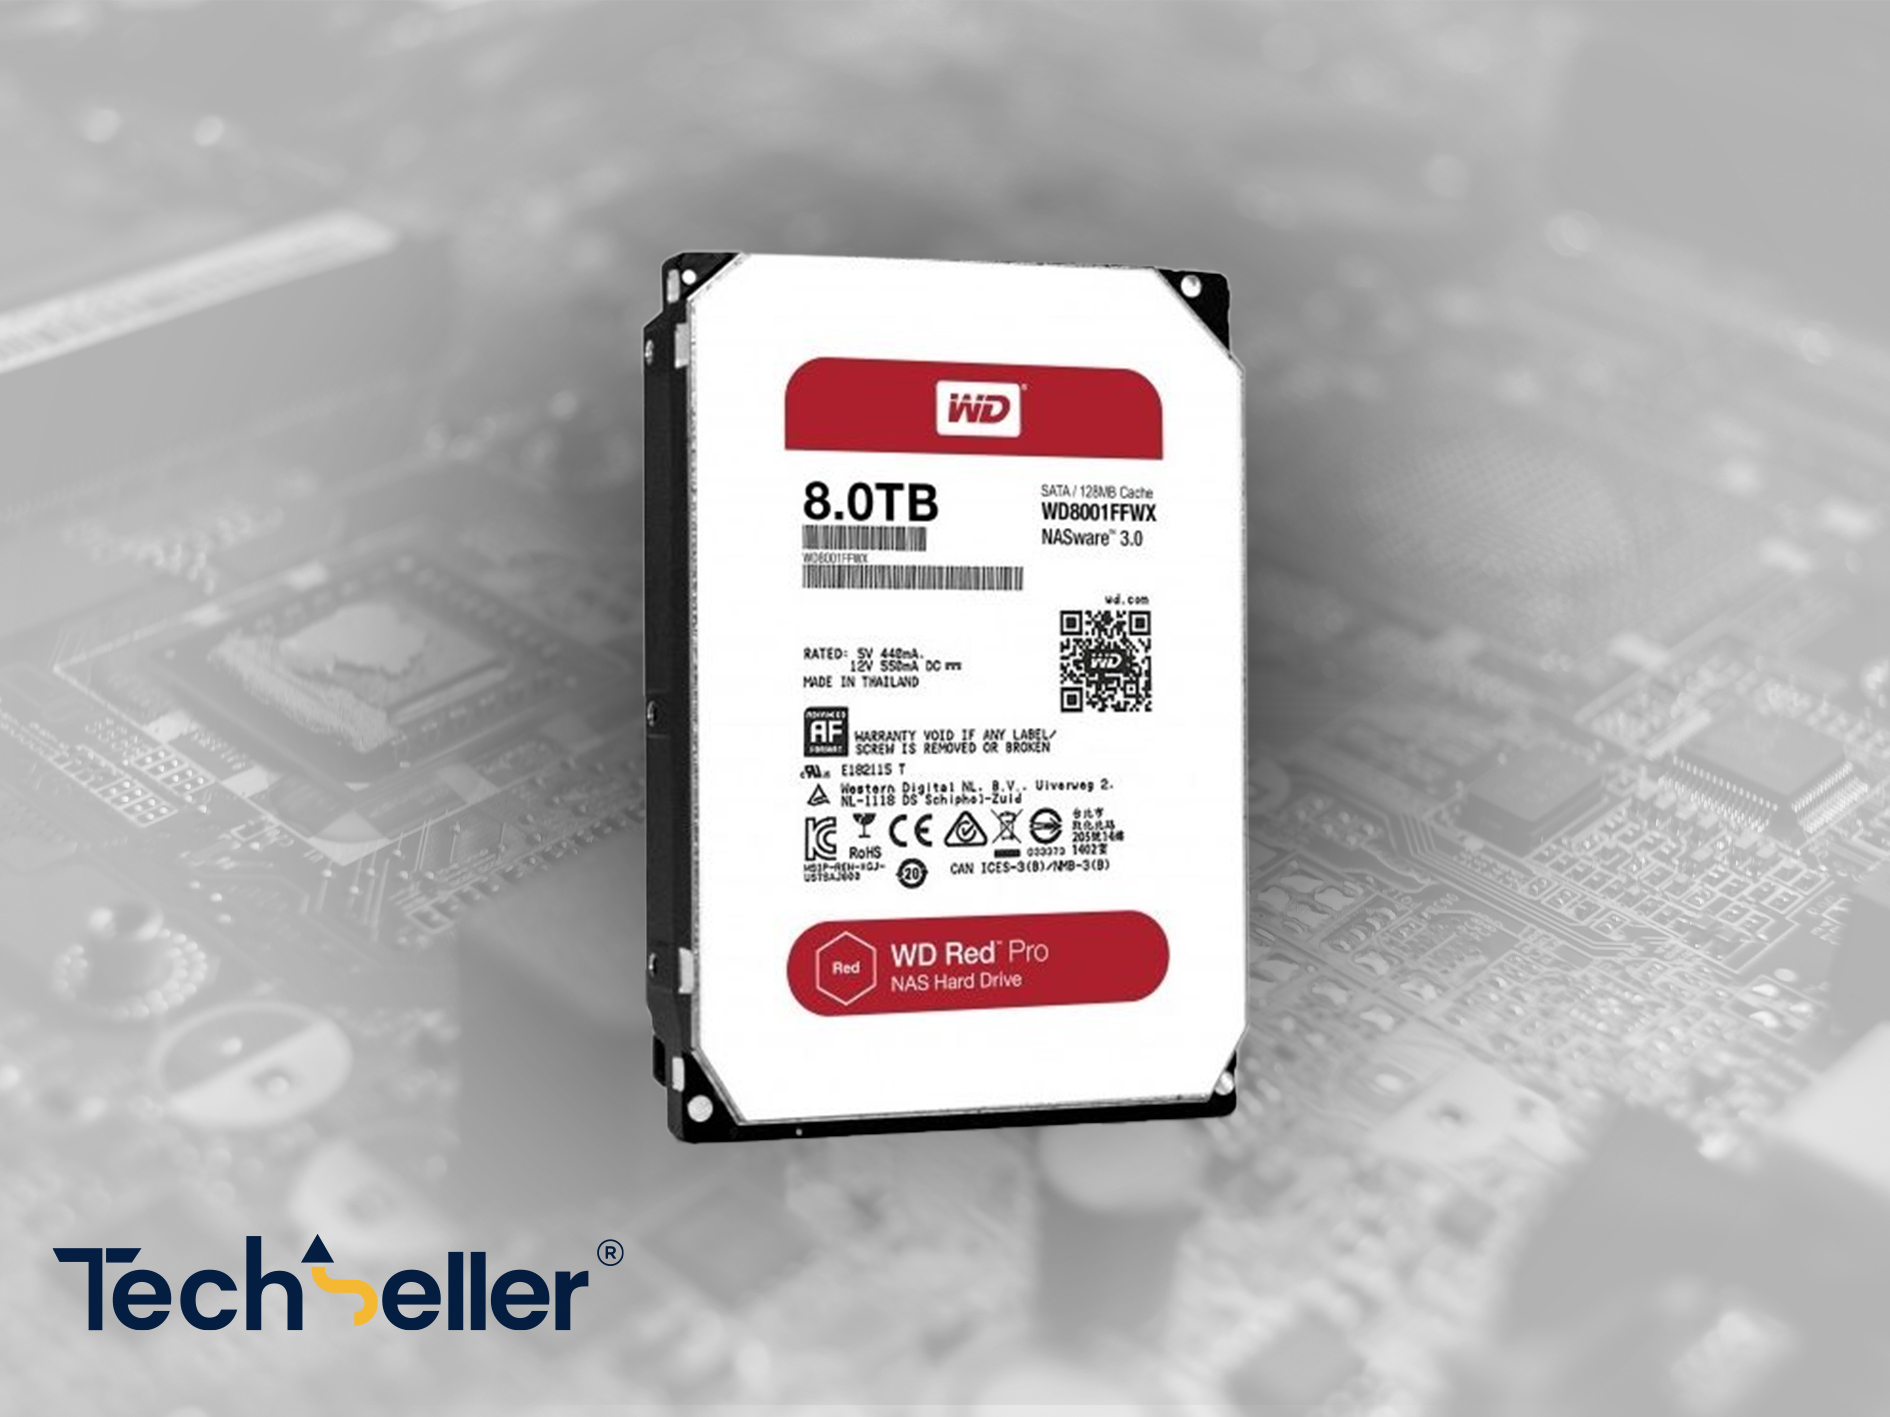 Elevate Your Data Management with the WD8001FFWX Hard Drive